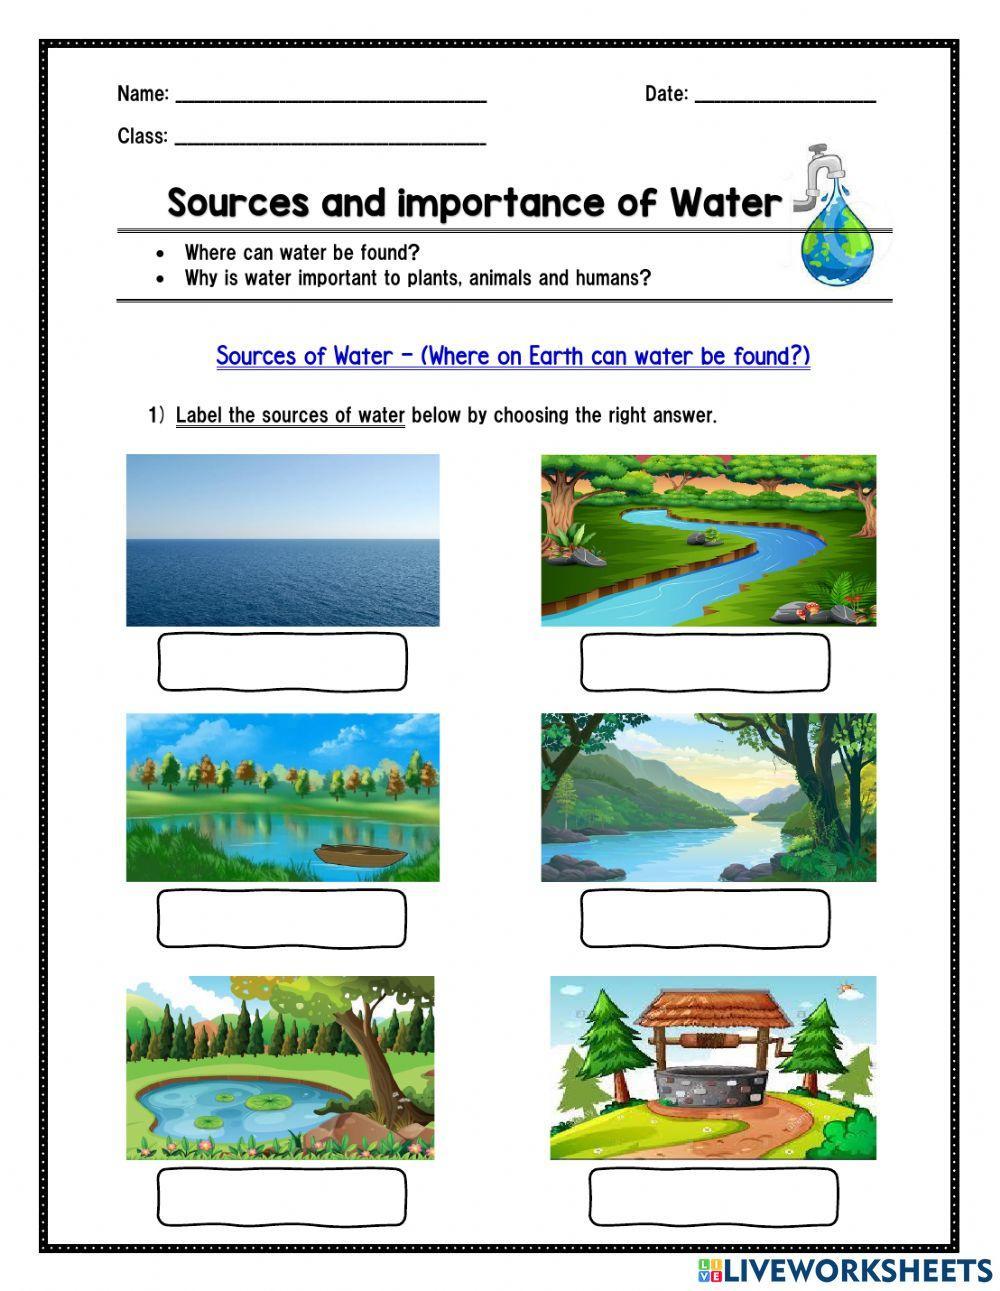 Sources and Importance of water